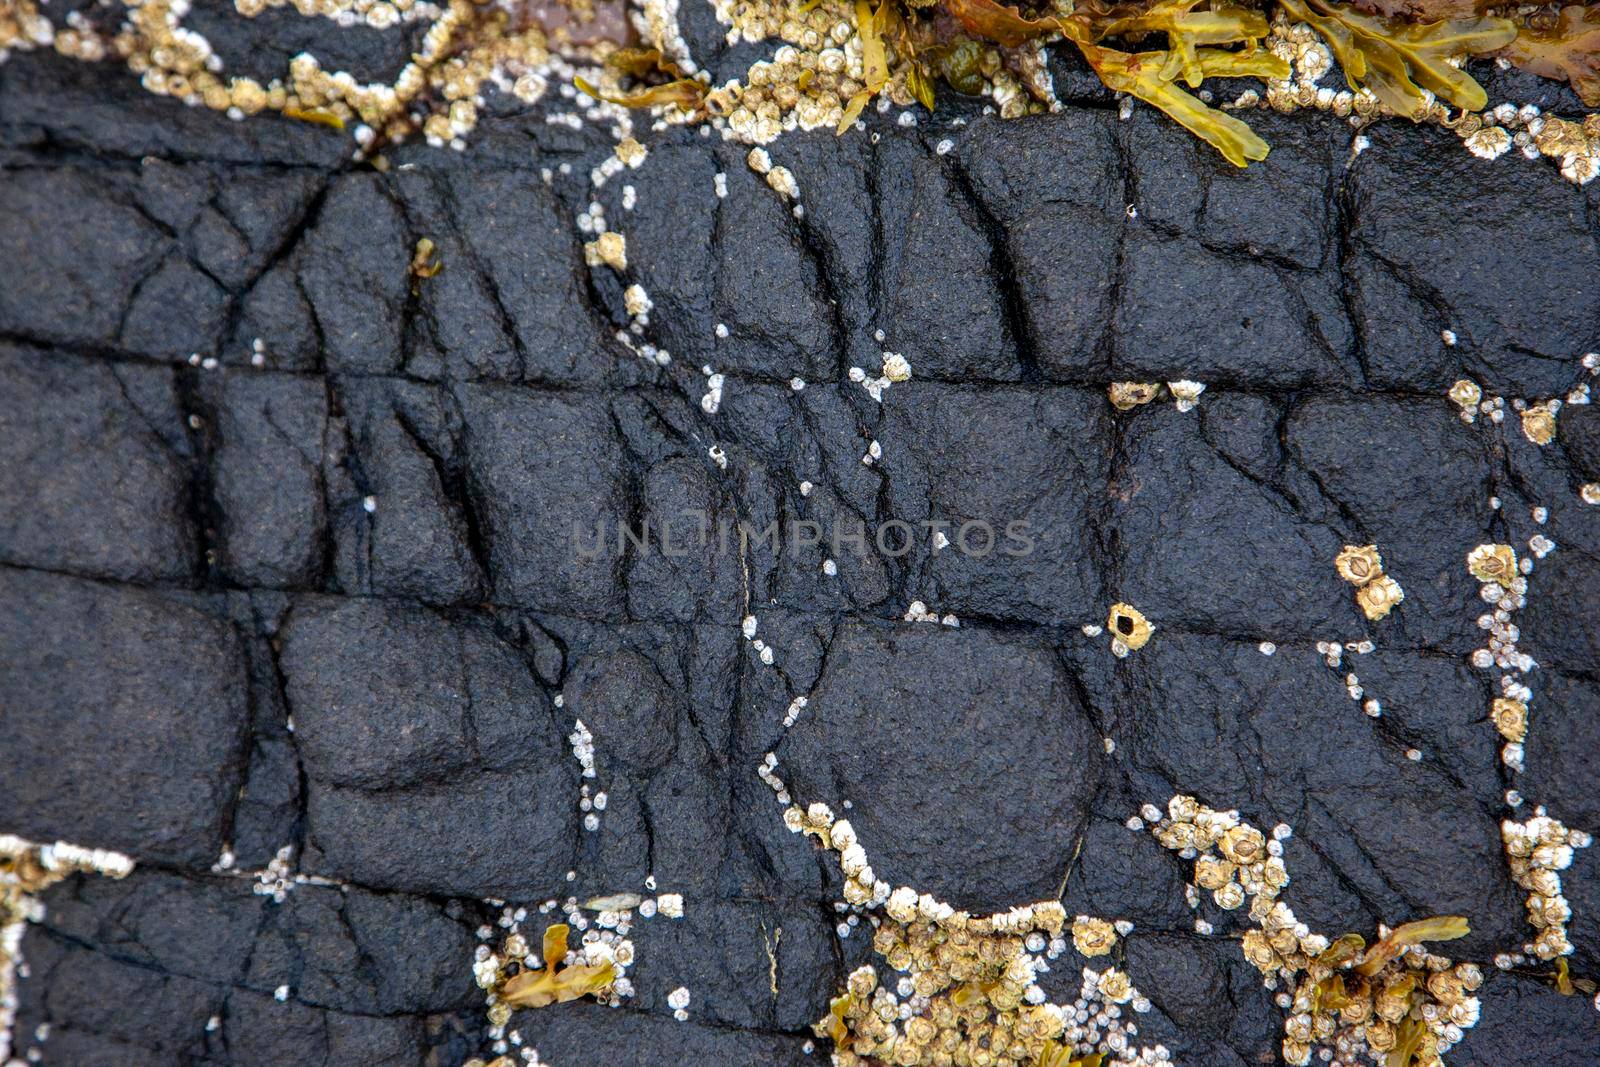  slipperly black rocks with cracks from the tide and barnacles